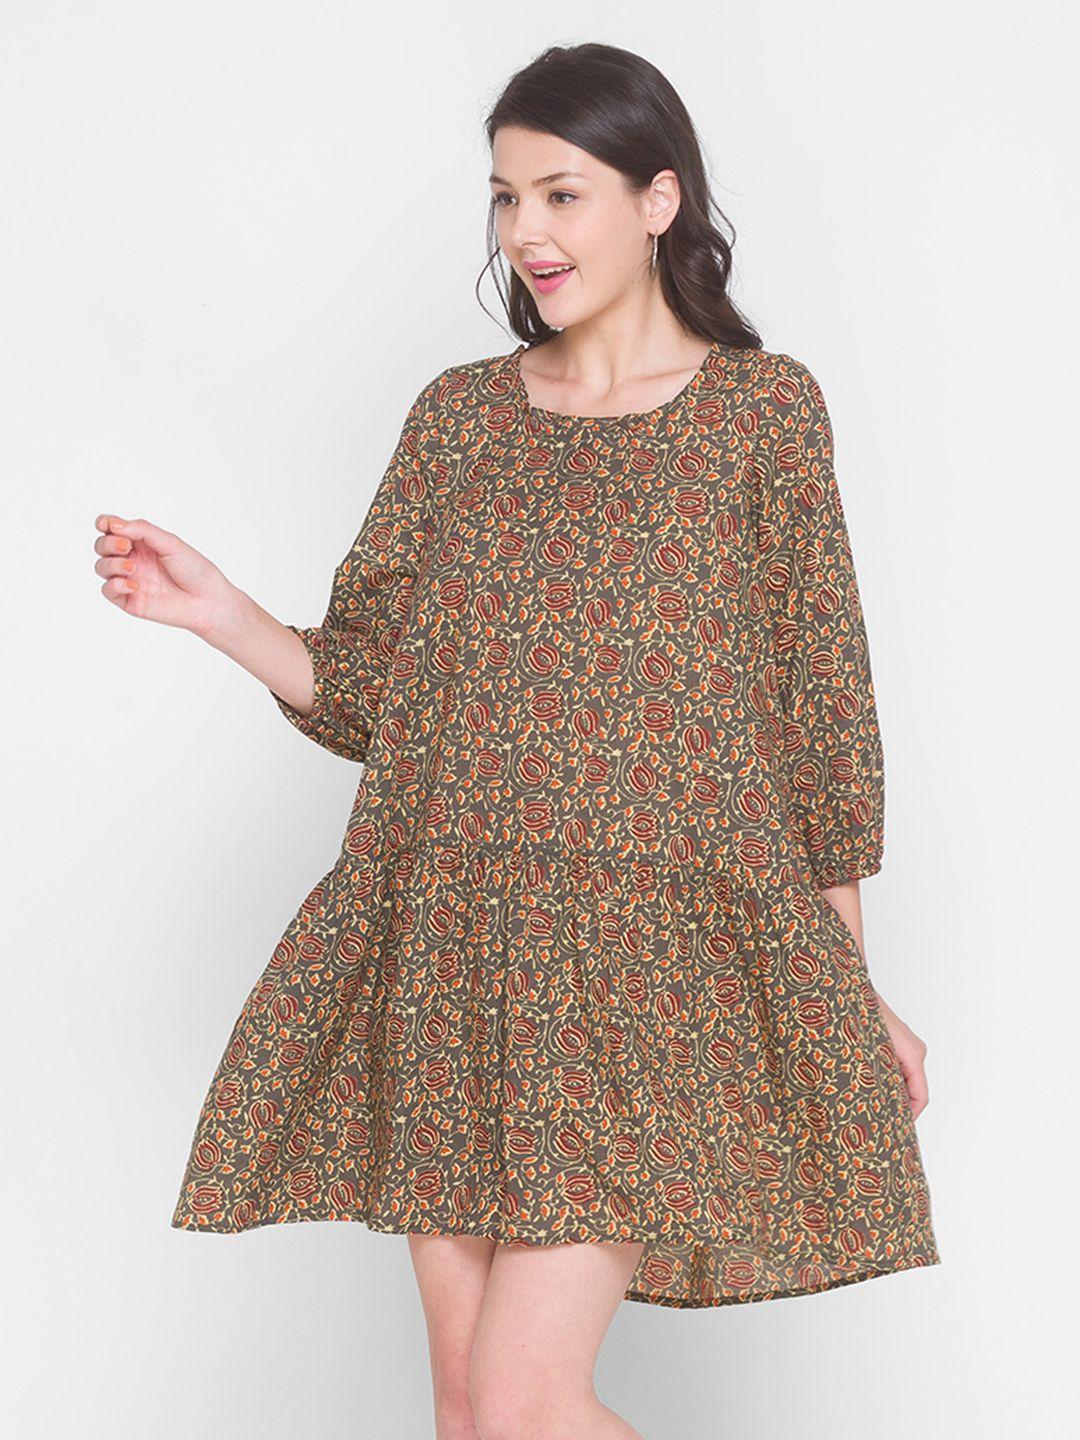 terquois green & maroon floral a-line dress